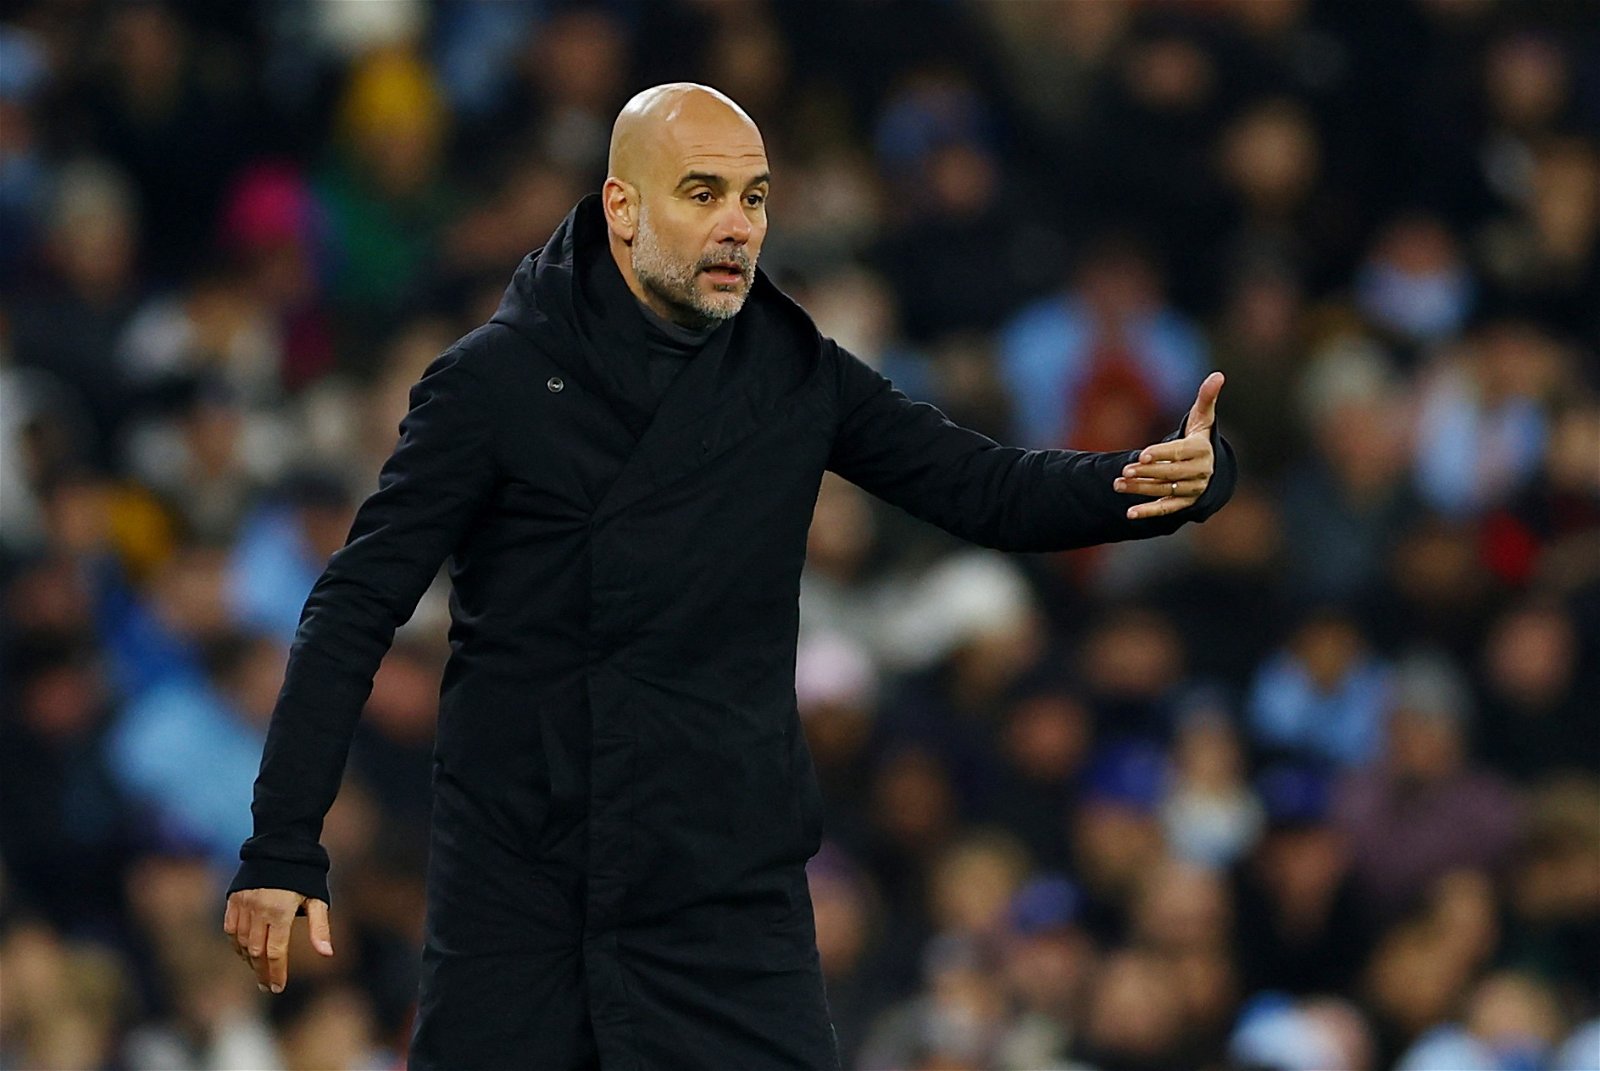 Guardiola feels Man City "deserved" to draw with Crystal Palace